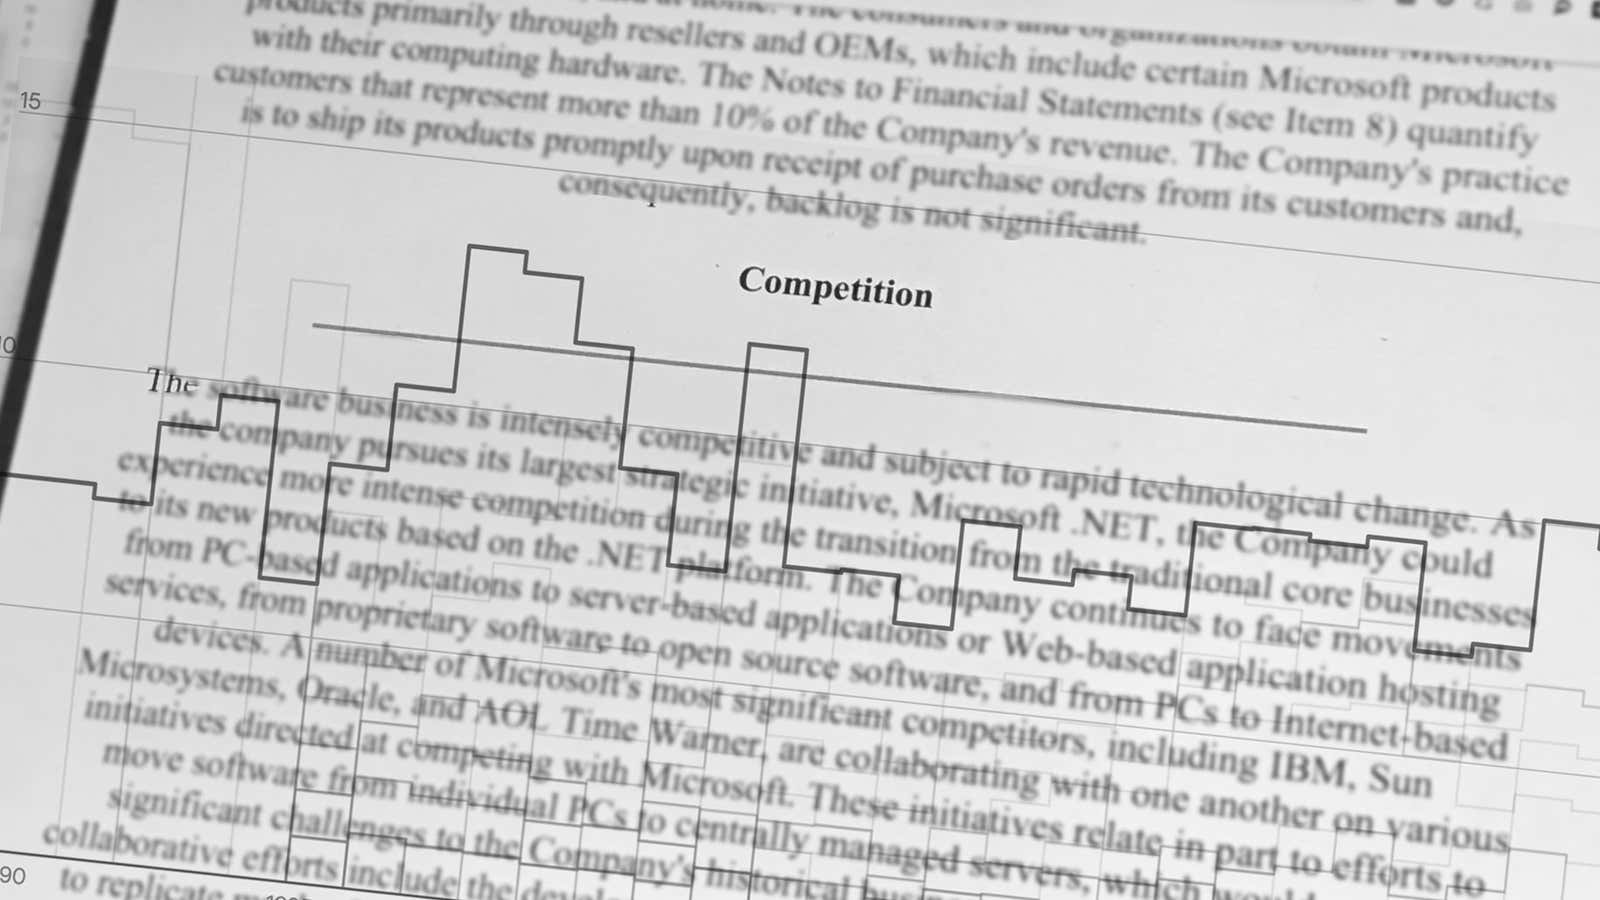 Thirty years of financial filings reveal Microsoft’s biggest competitors